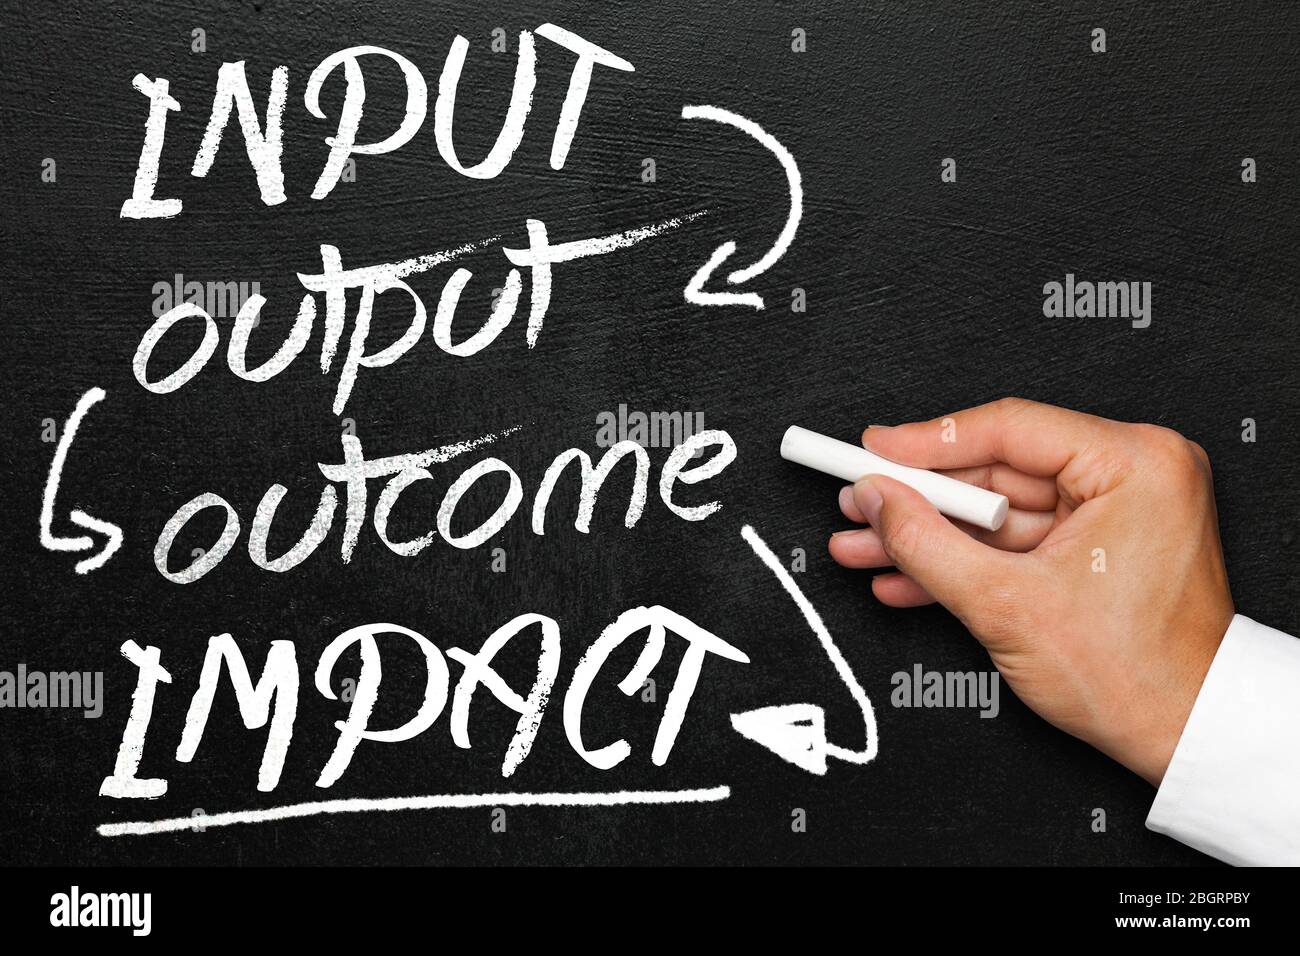 Input output outcome impact, blackboard or chalkboard with hand. Company monitoring and evaluation. Stock Photo